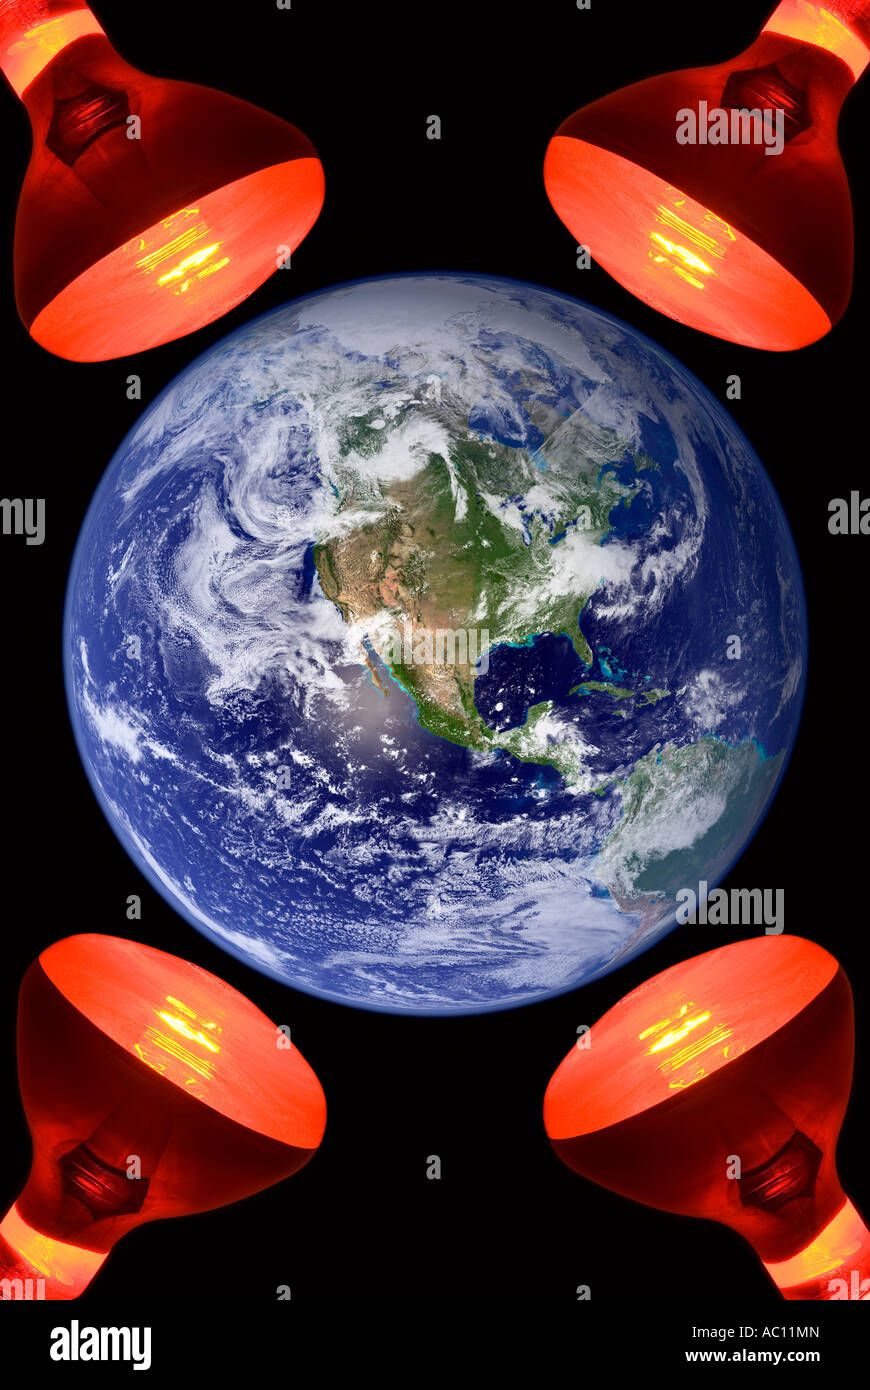 a photo illustration depicting global warming Stock Photo